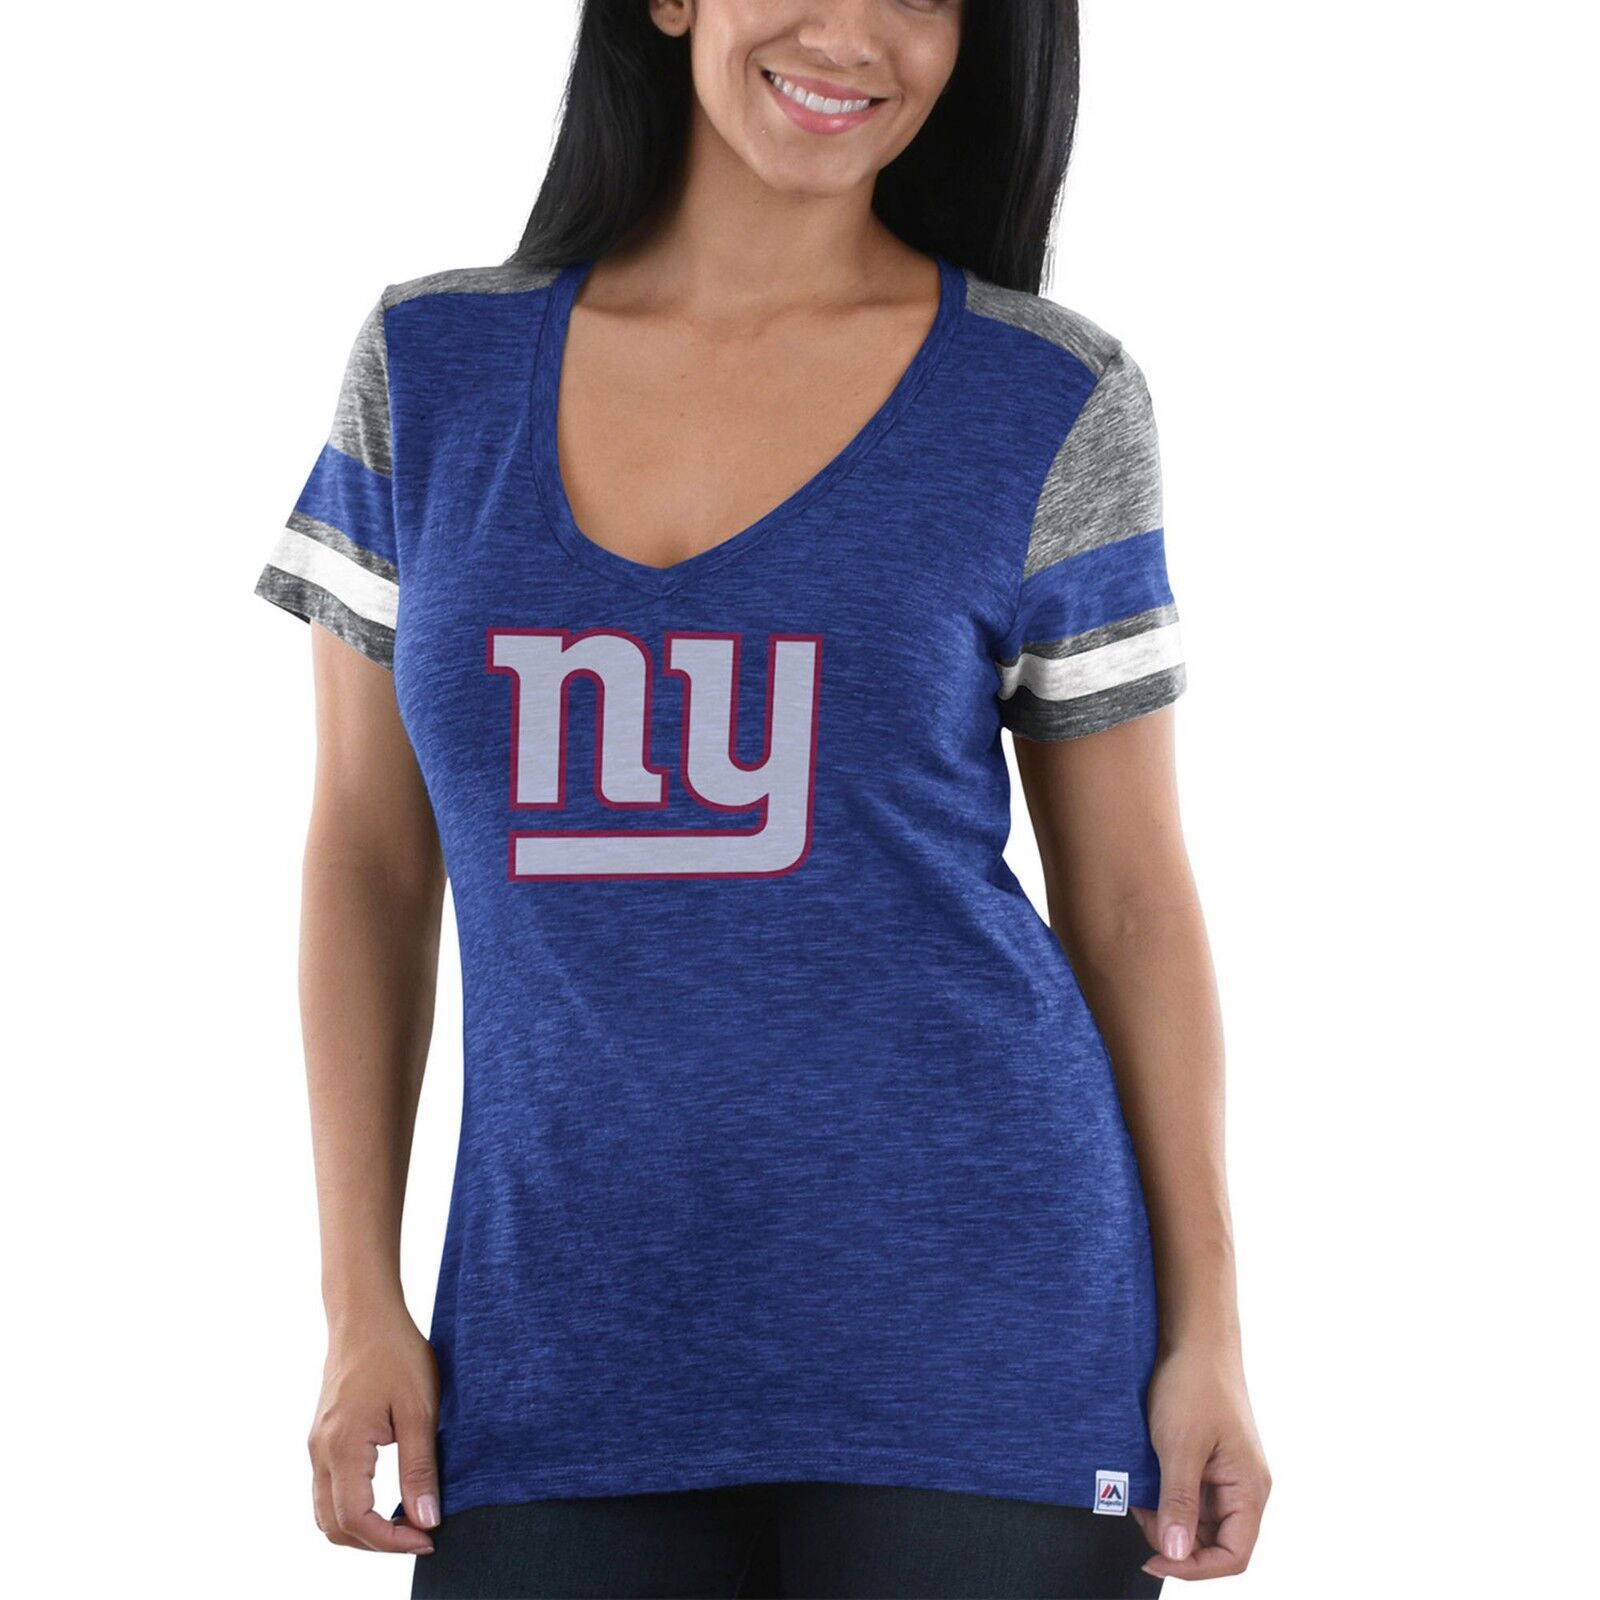 Women's Majestic NFL New York Giants Game Day Apparel Tee T-Shirt Plus Size  3X